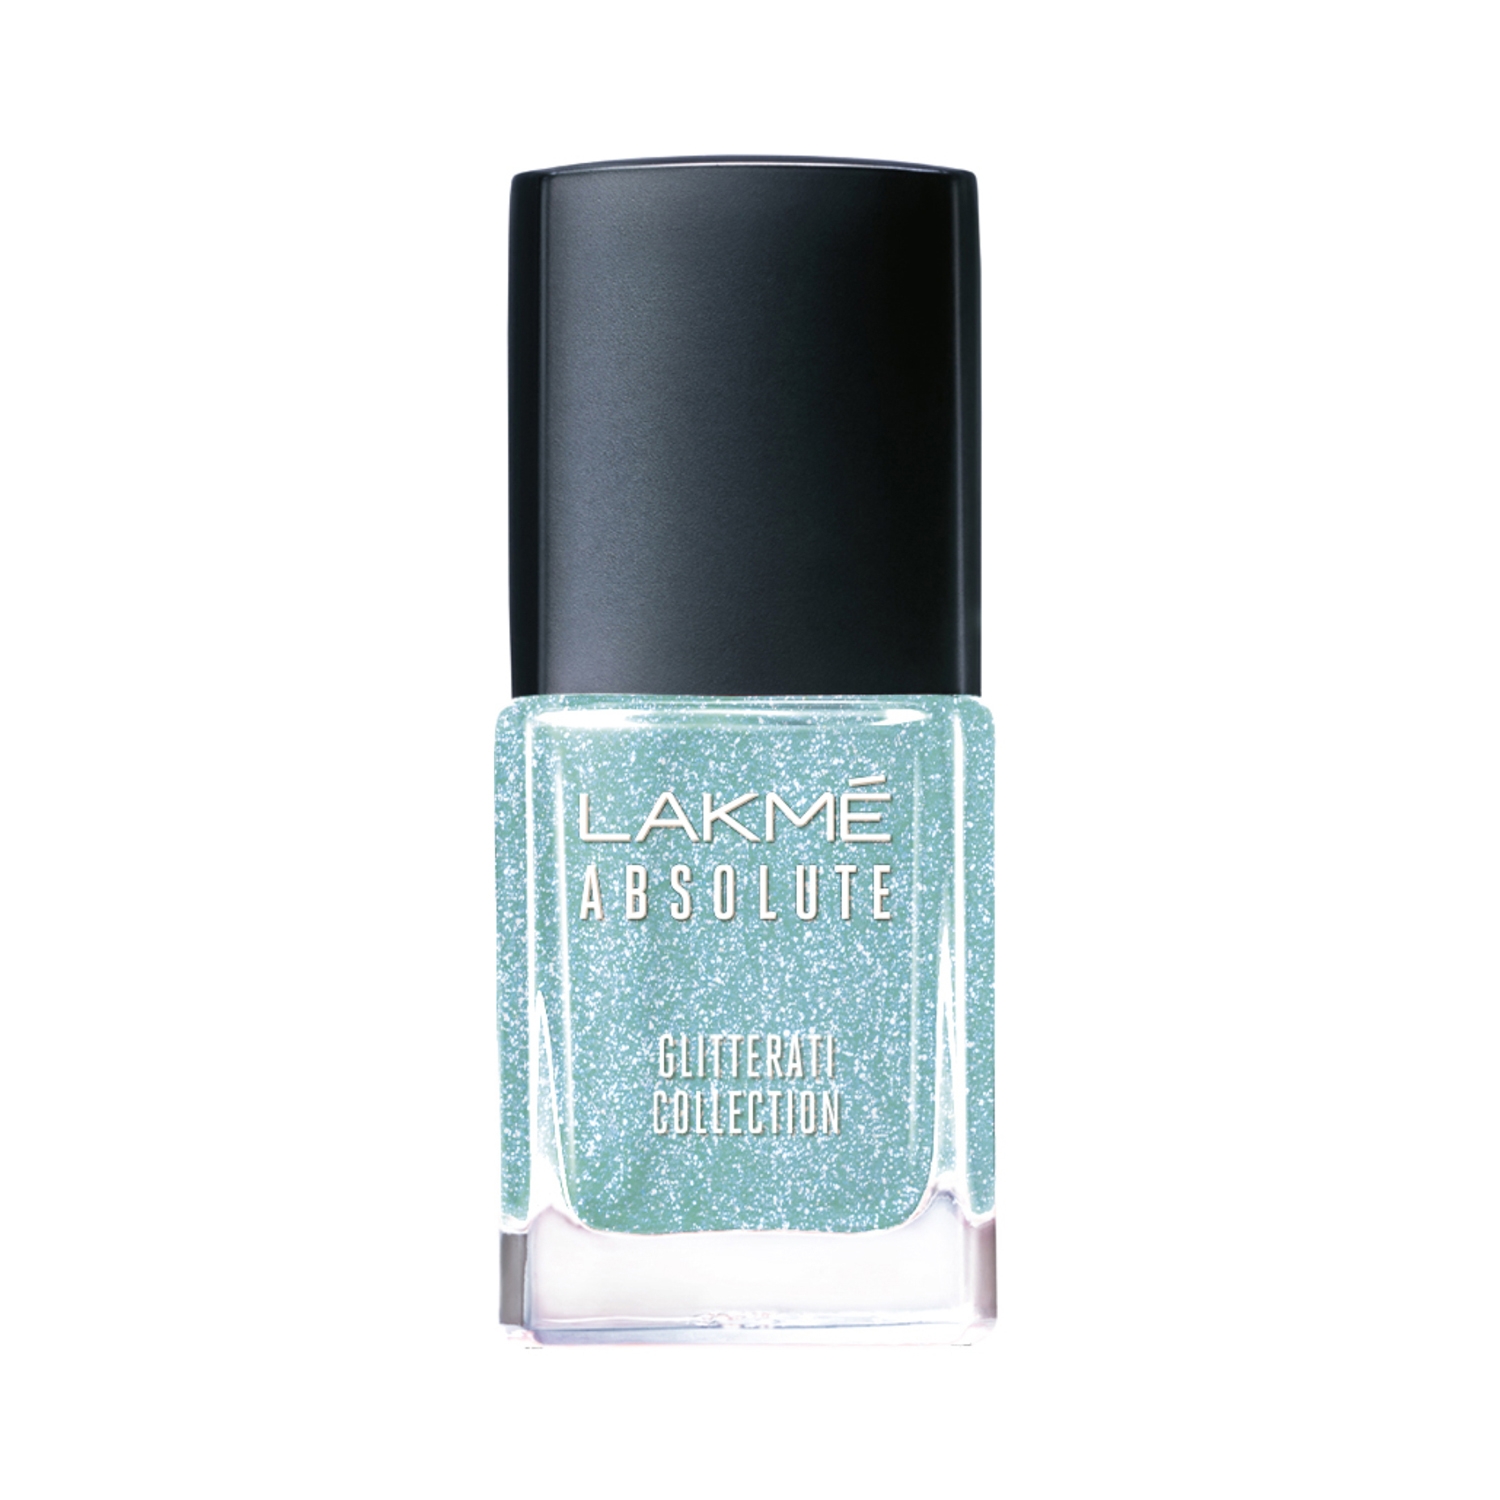 LAKME Absolute Gel Stylist Nail Color (60.0000 gm, Jade Floret) in Gurgaon  at best price by Hindustan Unilever Ltd (Regional Office) - Justdial